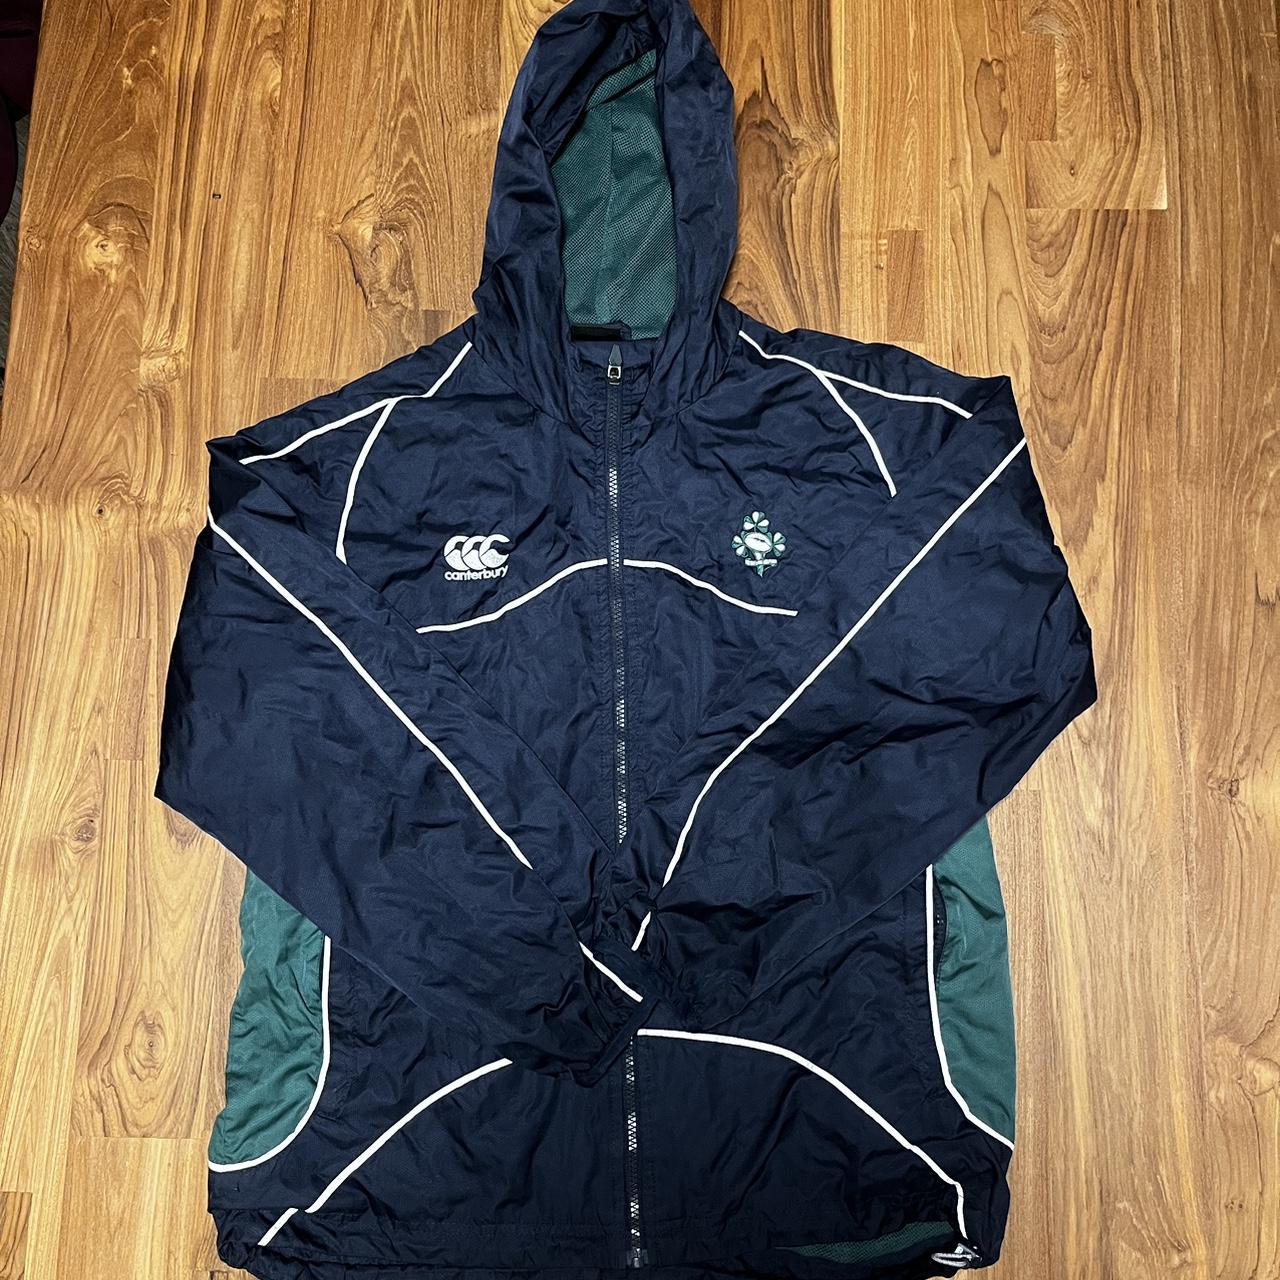 item listed by boulderthriftz